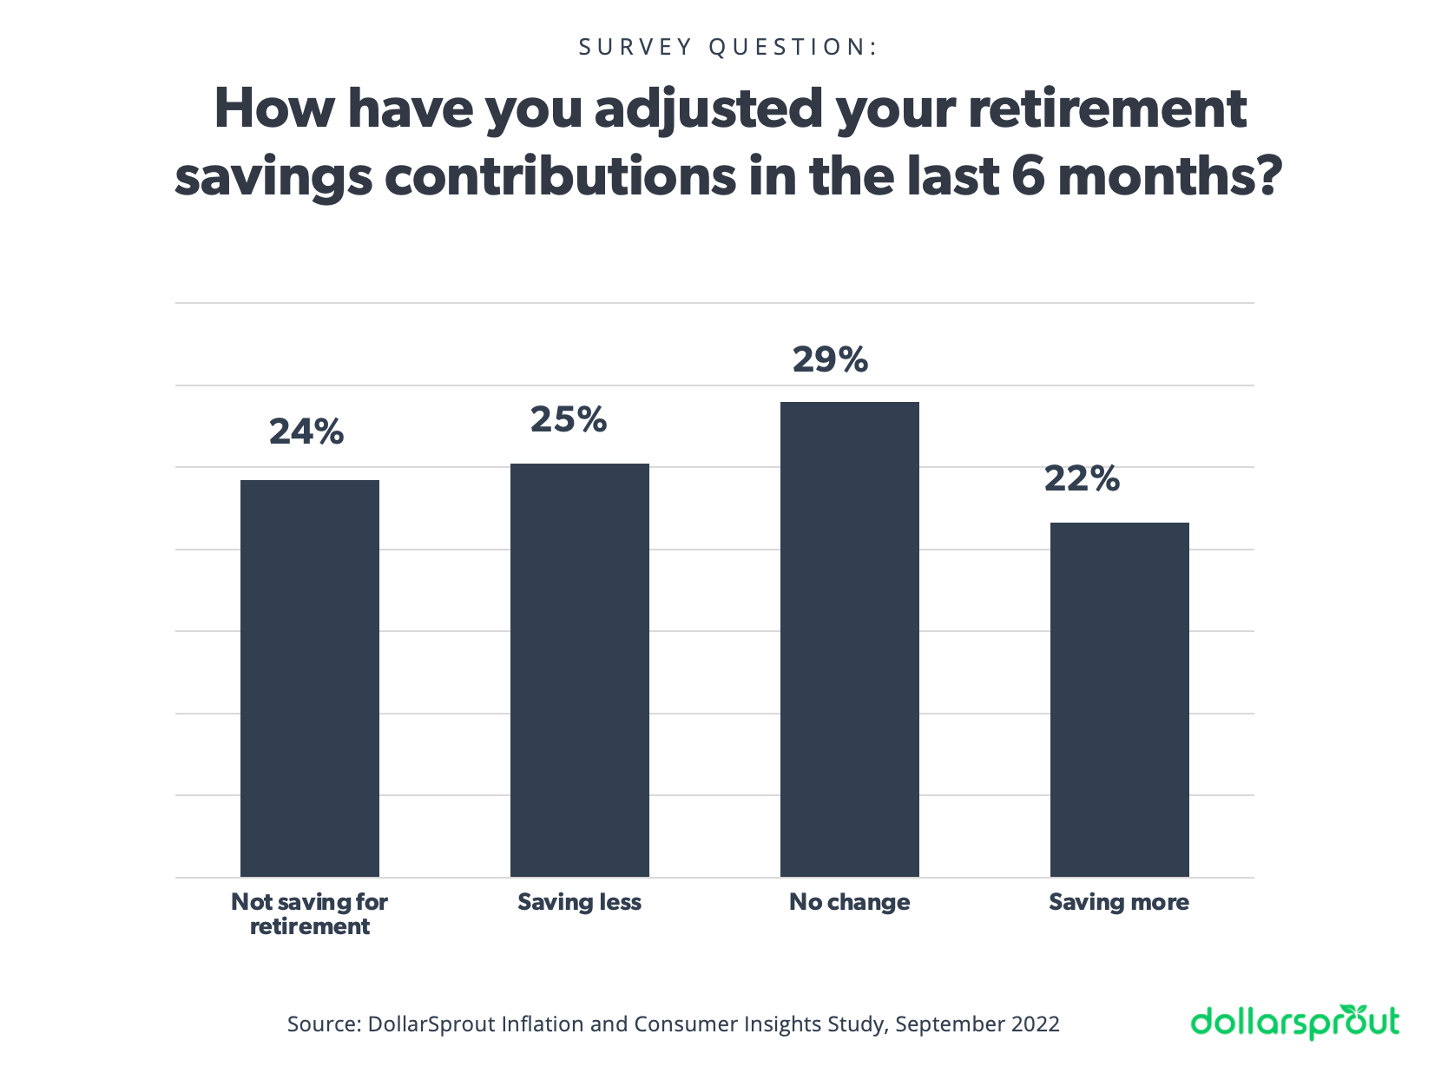 How have you adjusted your retirement savings contributions in the last 6 months? Only 22% are saving more, the rest are either saving the same amount, less, or are not saving at all.